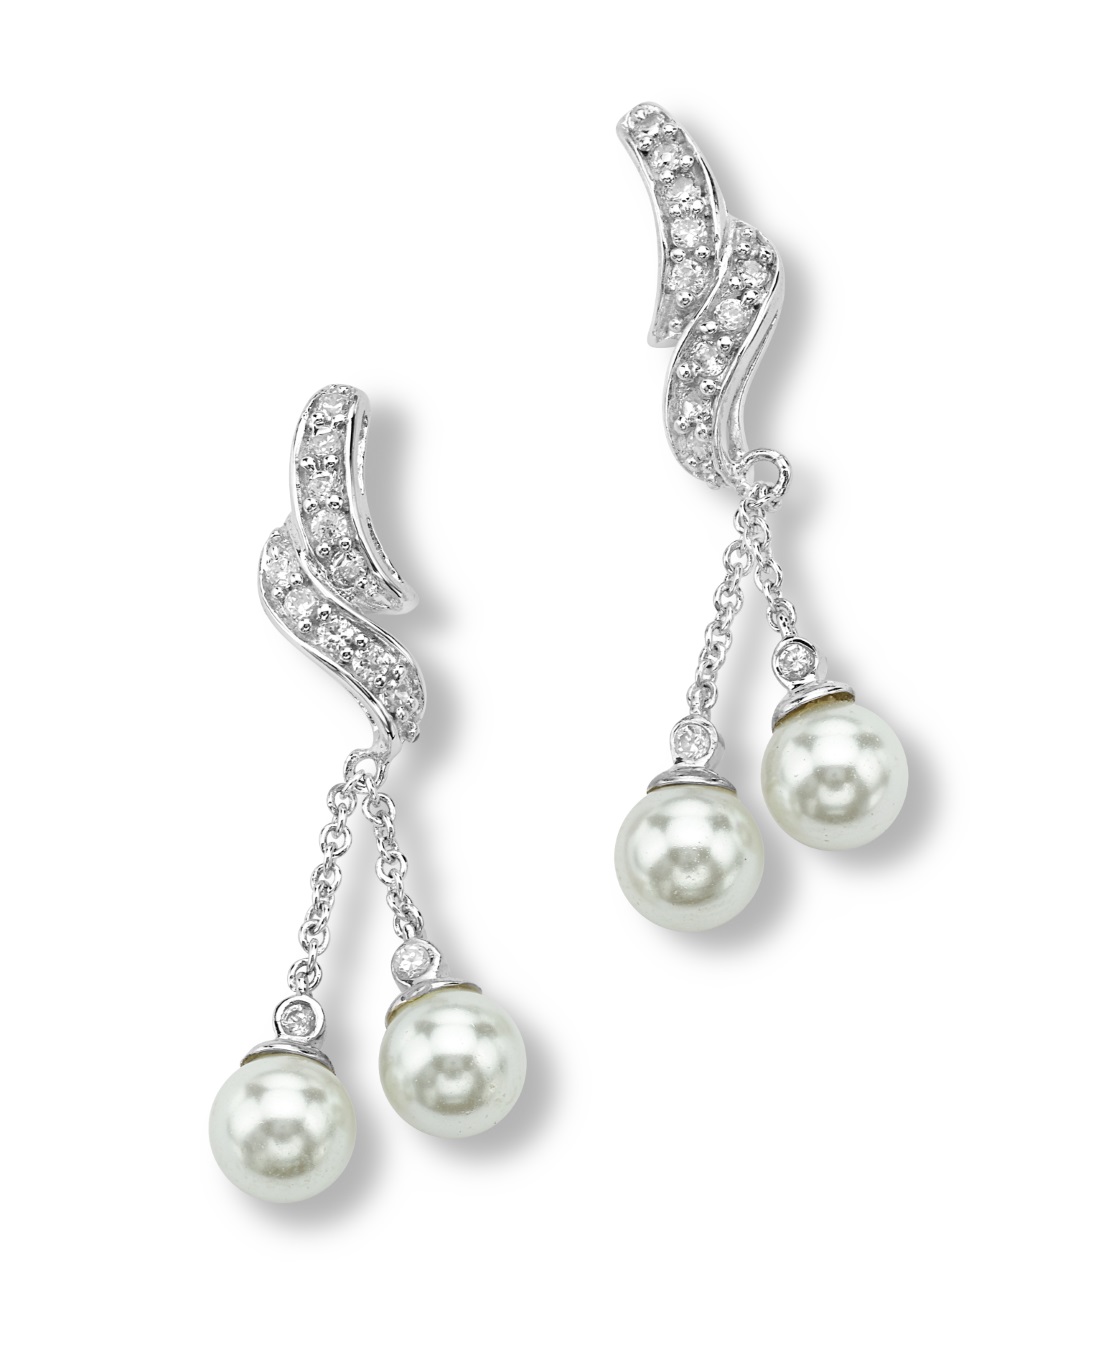 White freshwater cultured pearl and CZ Dangle Earrings, Rhodium Plated Sterling Silver